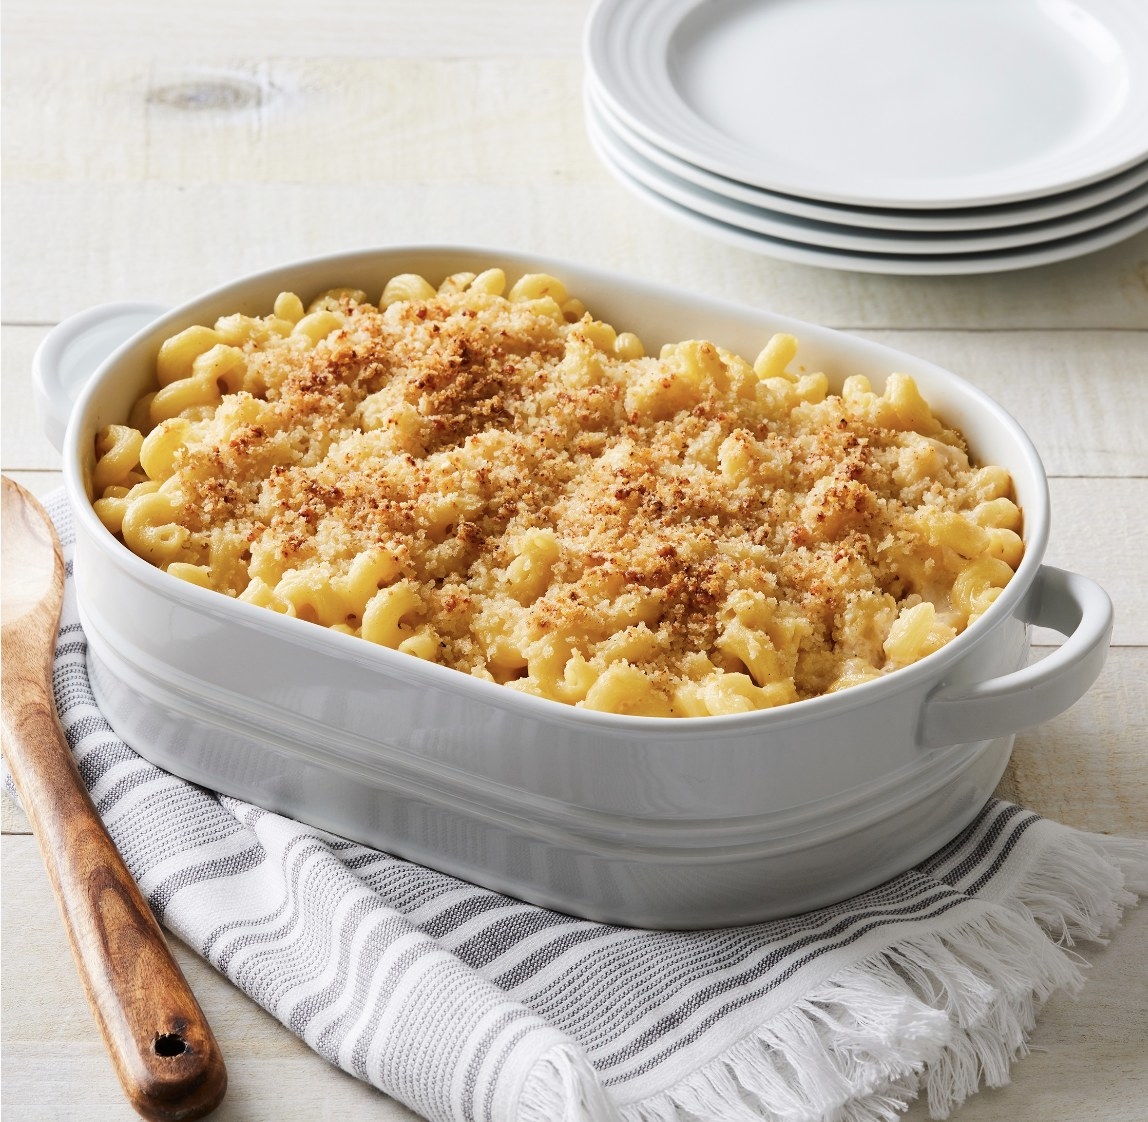 The white tray with handles is holding homemade macaroni and cheese